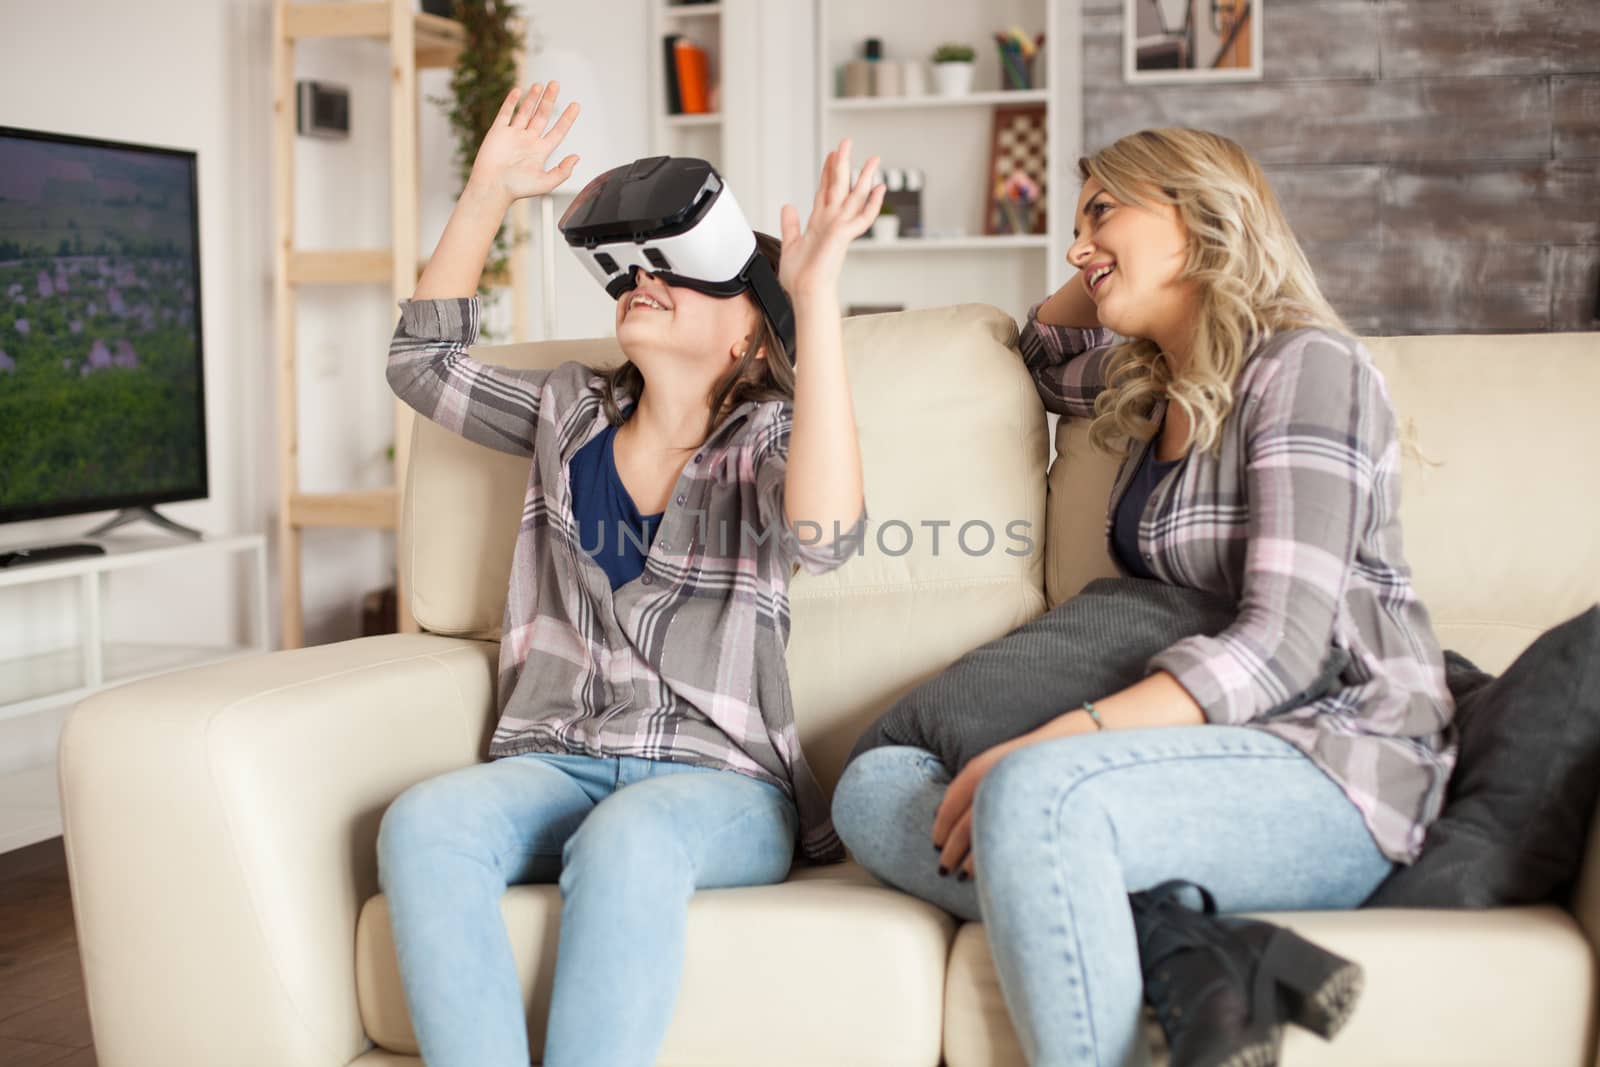 Amazed little girl sitting next to her mother on the couch while using virtual reality headset.